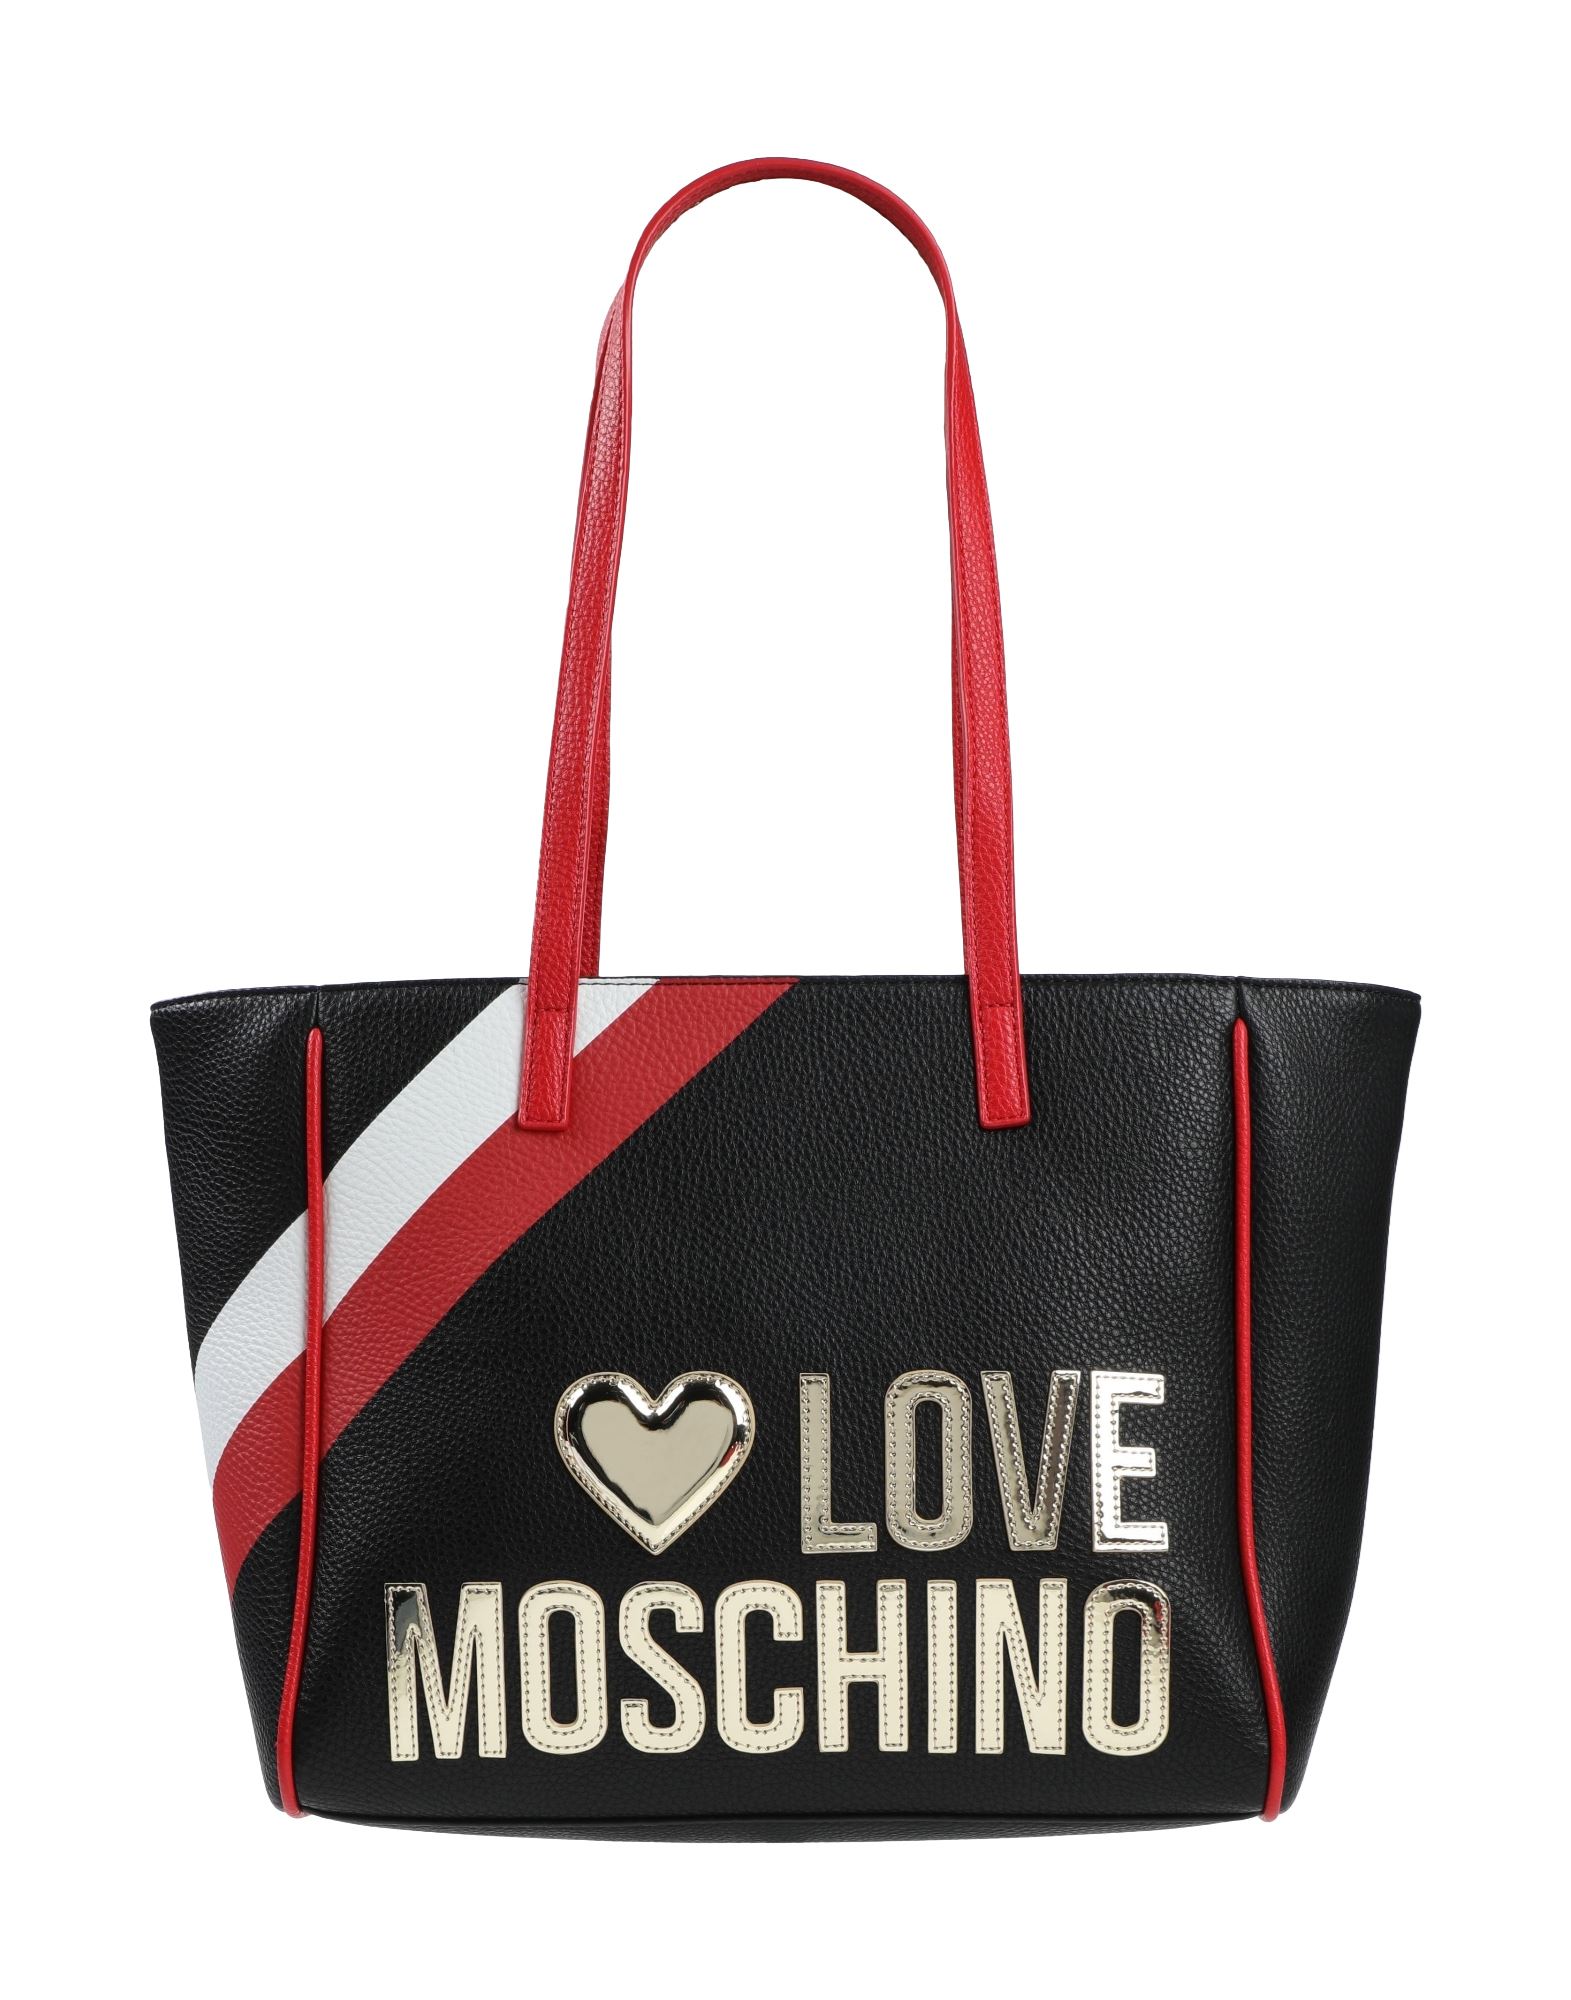 LOVE MOSCHINO Shoulder bags - Item 45553004